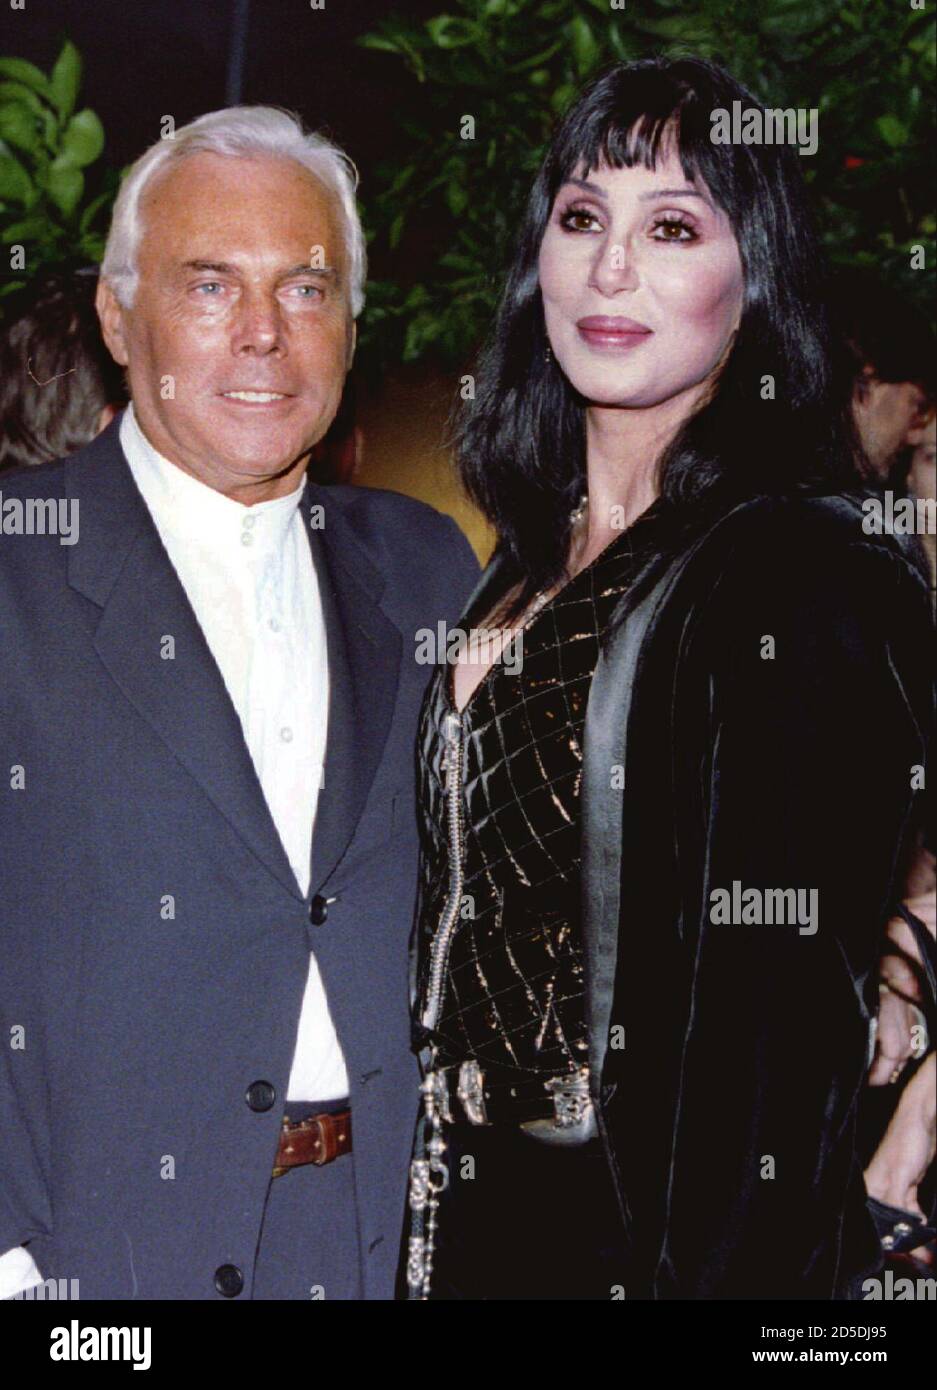 Fashion designer Giorgio Armani (L) poses for photographers with actress Cher before the a fashion show and dinner February 4 in New York. The show featured Armani's spring and summer